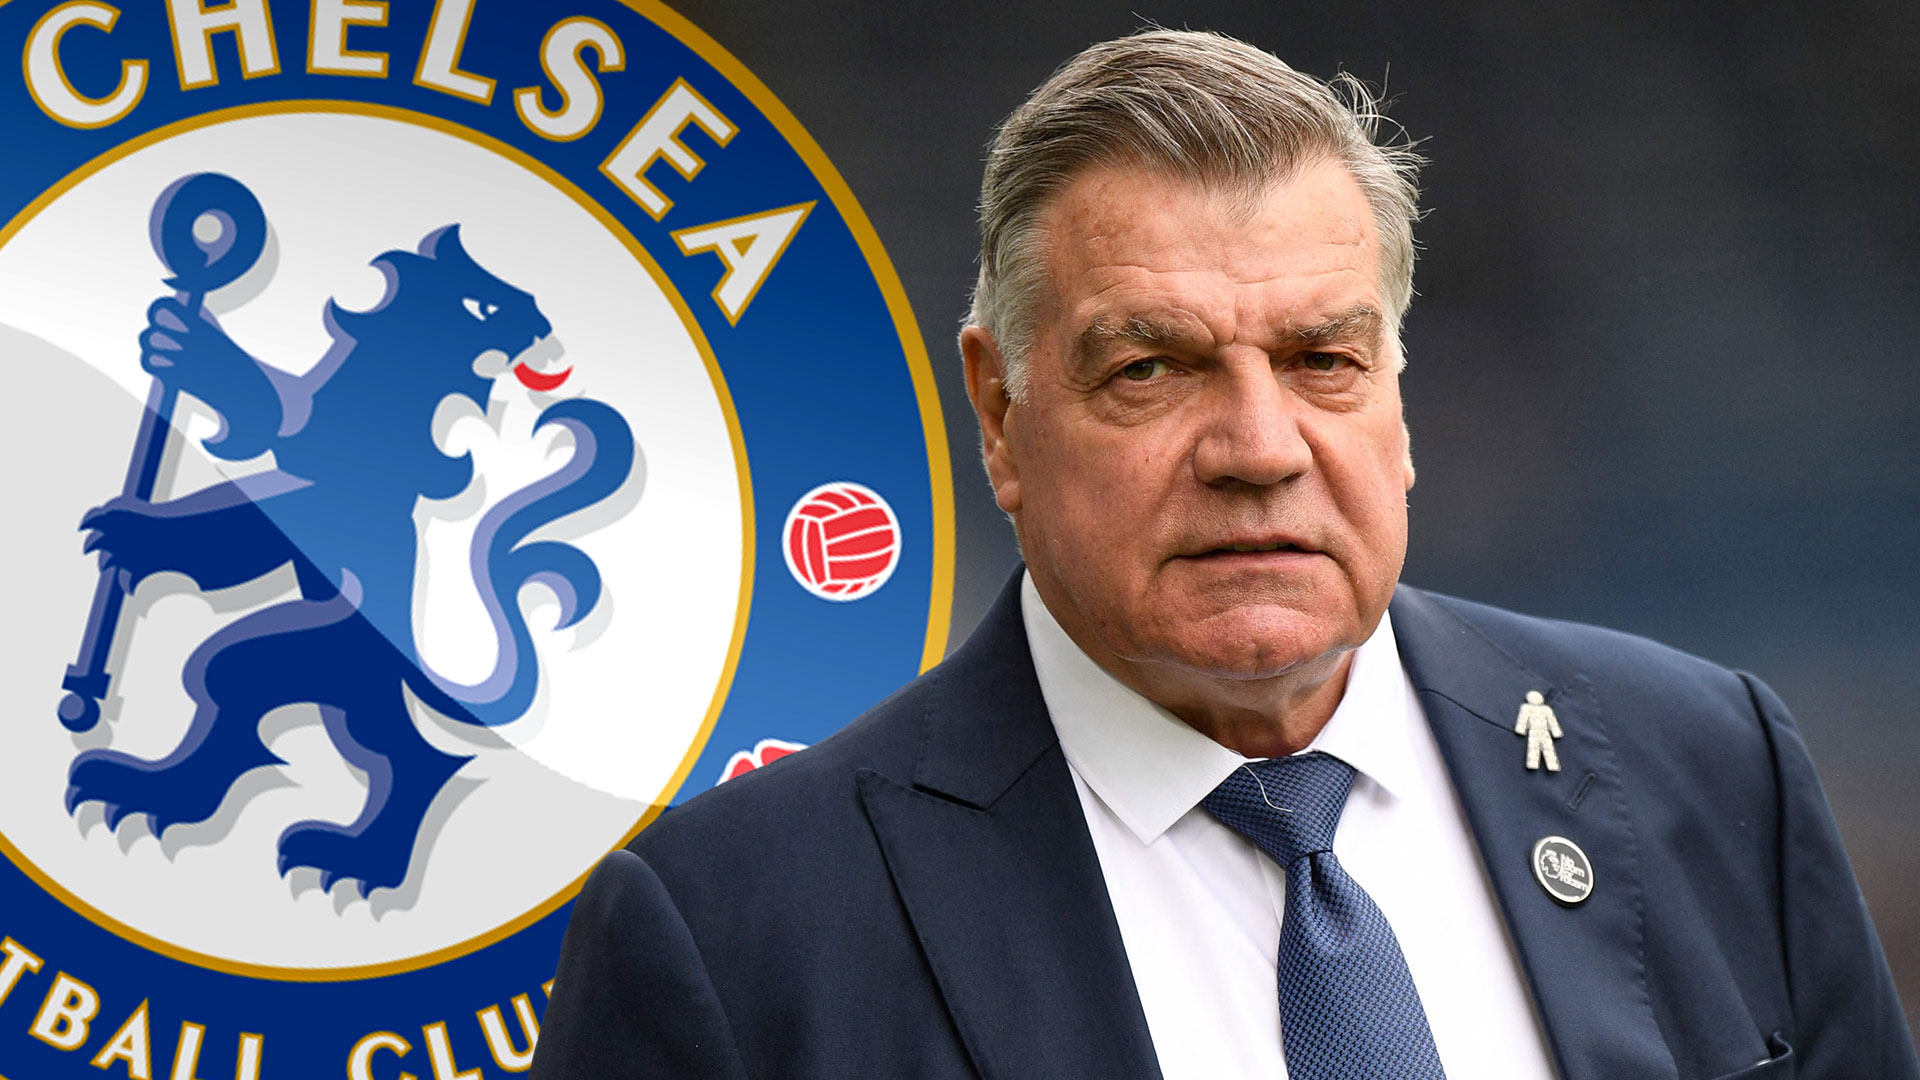 Sam Allardyce offers to ‘fly back from Dubai tomorrow’ to replace Mauricio Pochettino as Chelsea manager [Video]